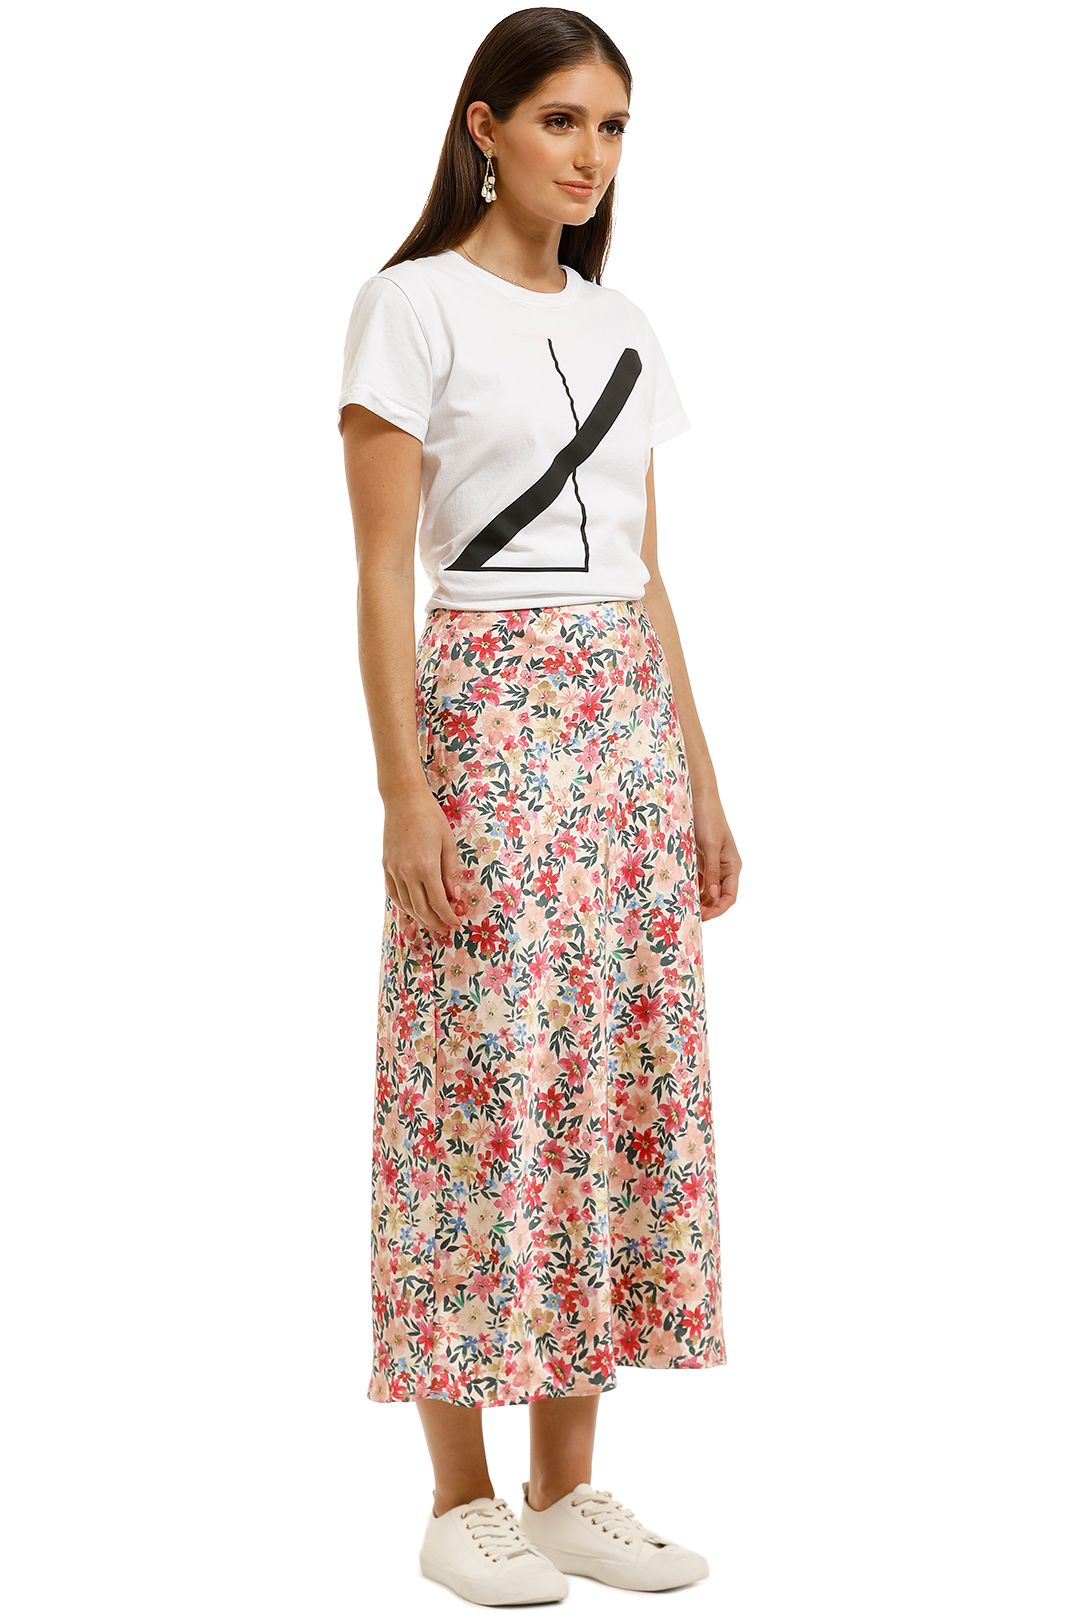 CMEO-Collective-Time-Flew-Skirt-Cream-Garden-Floral-Side